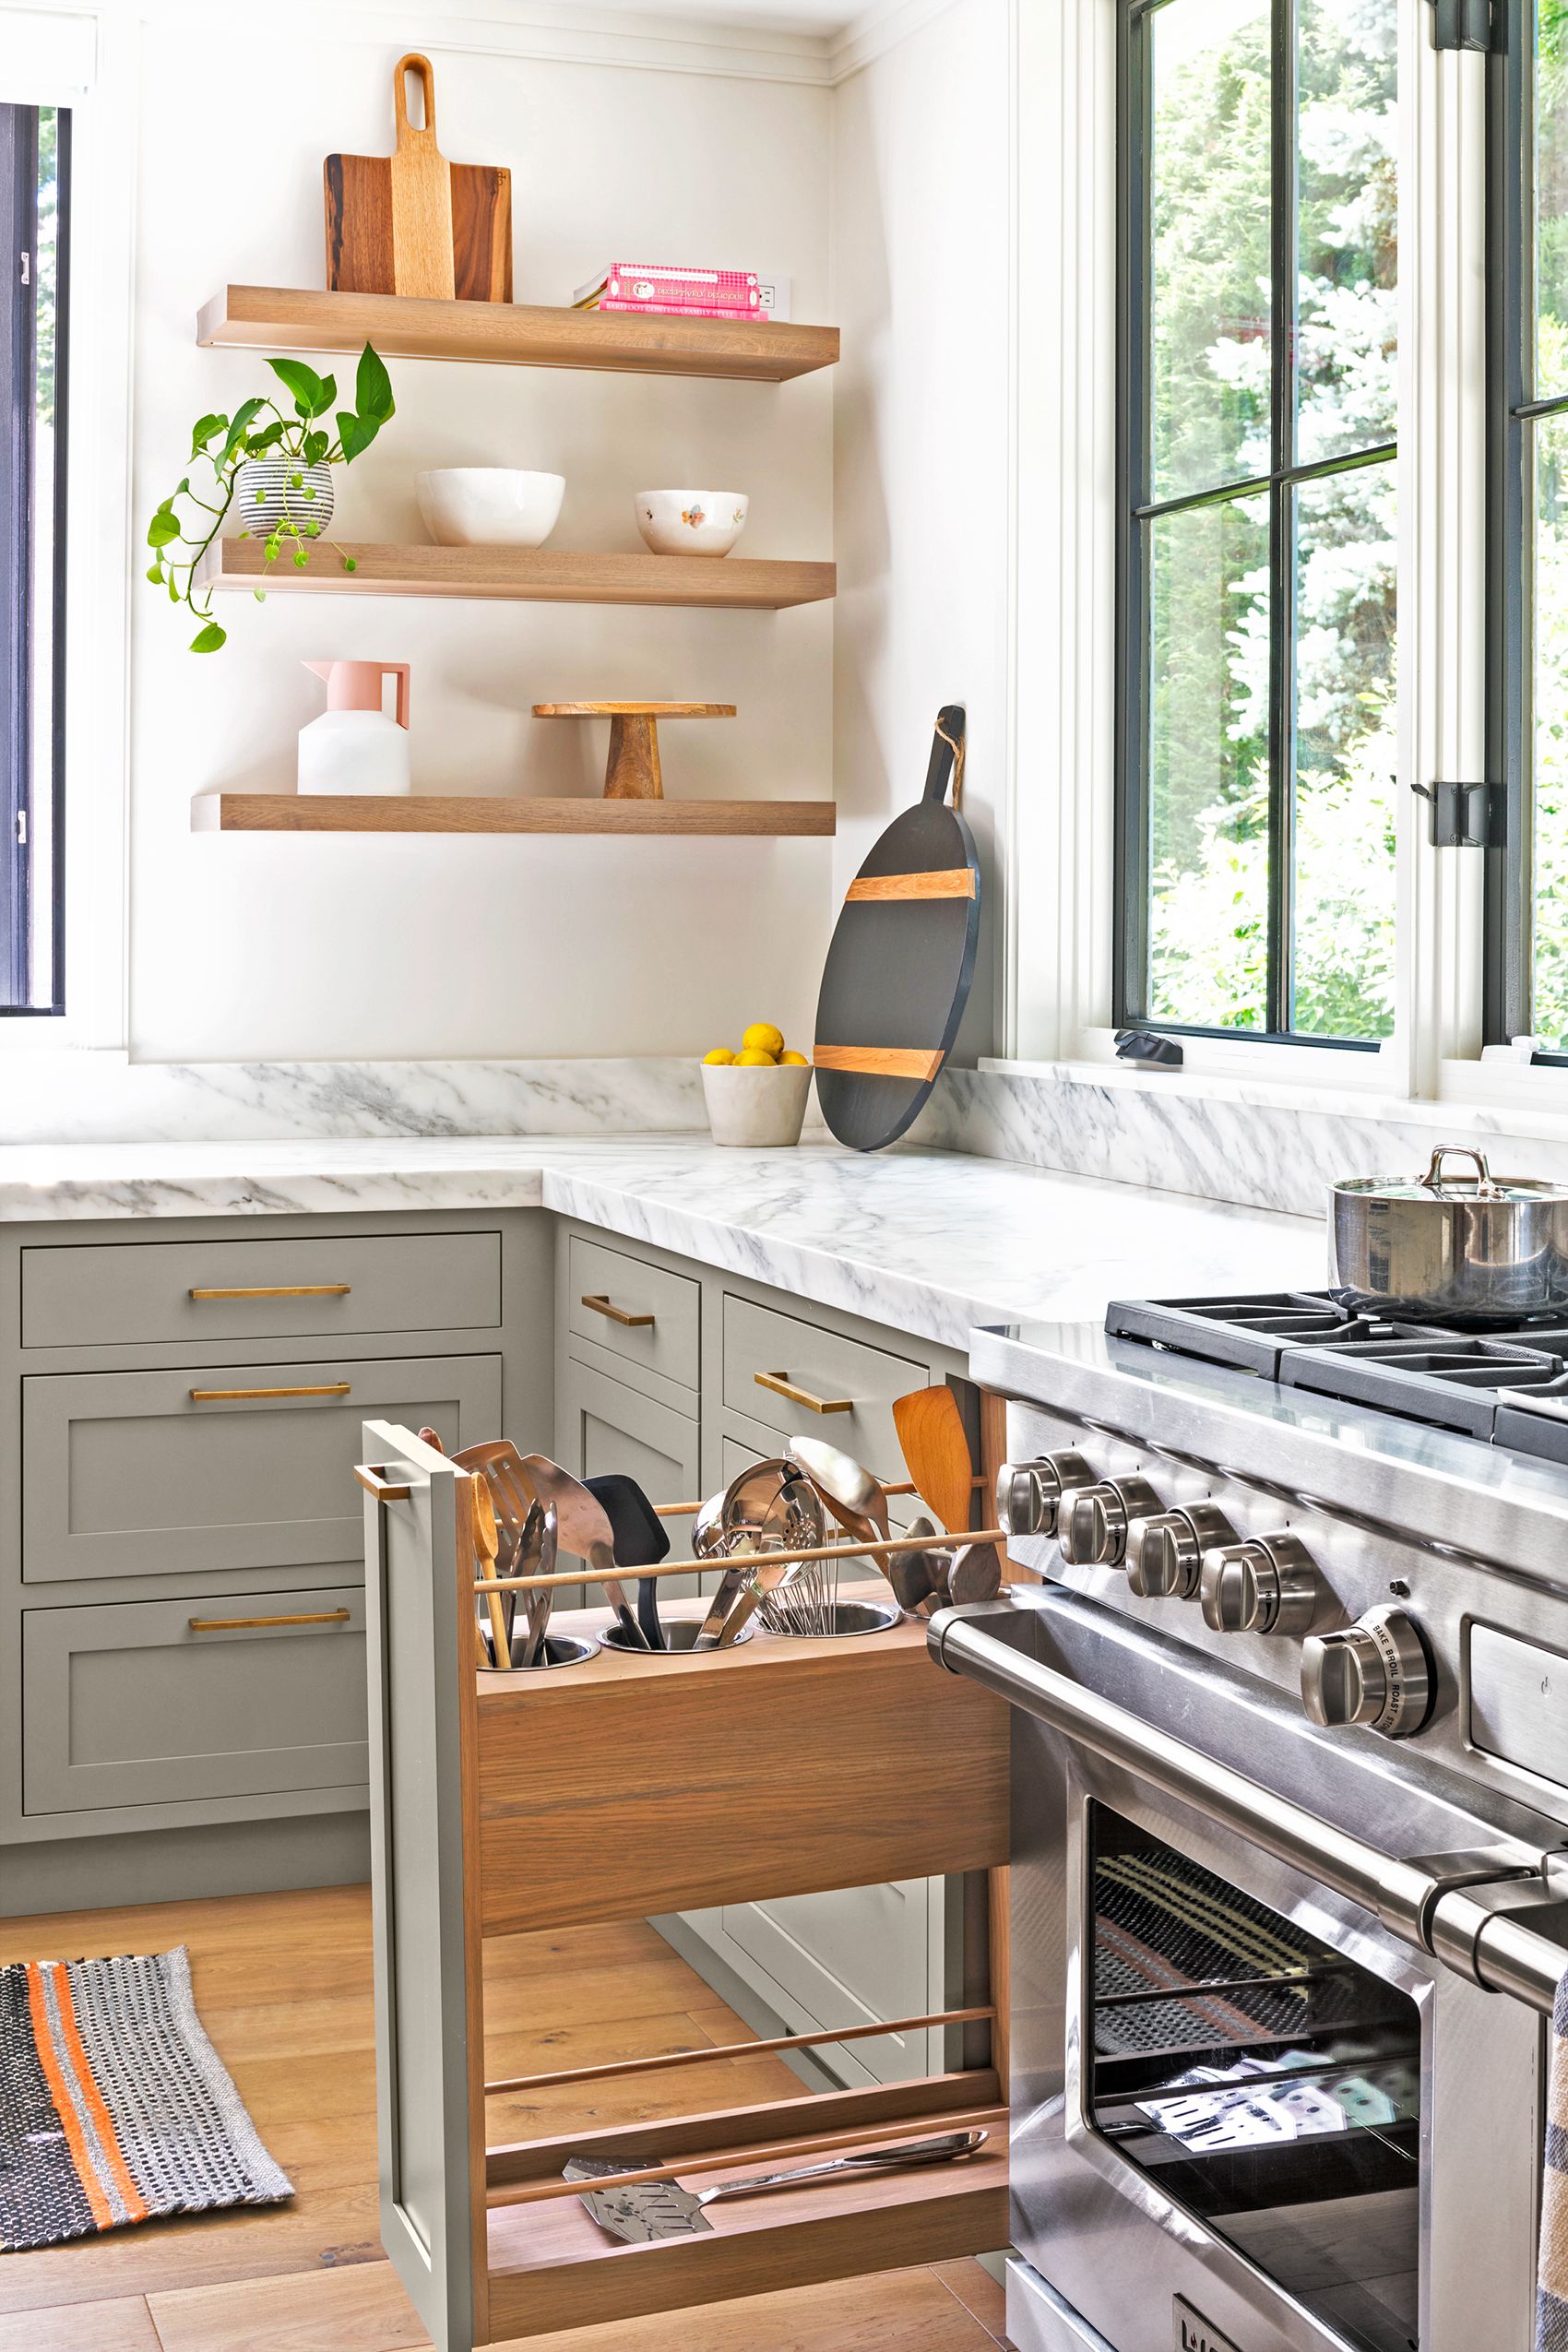 Kitchen remodel cost: Where to spend and how to save